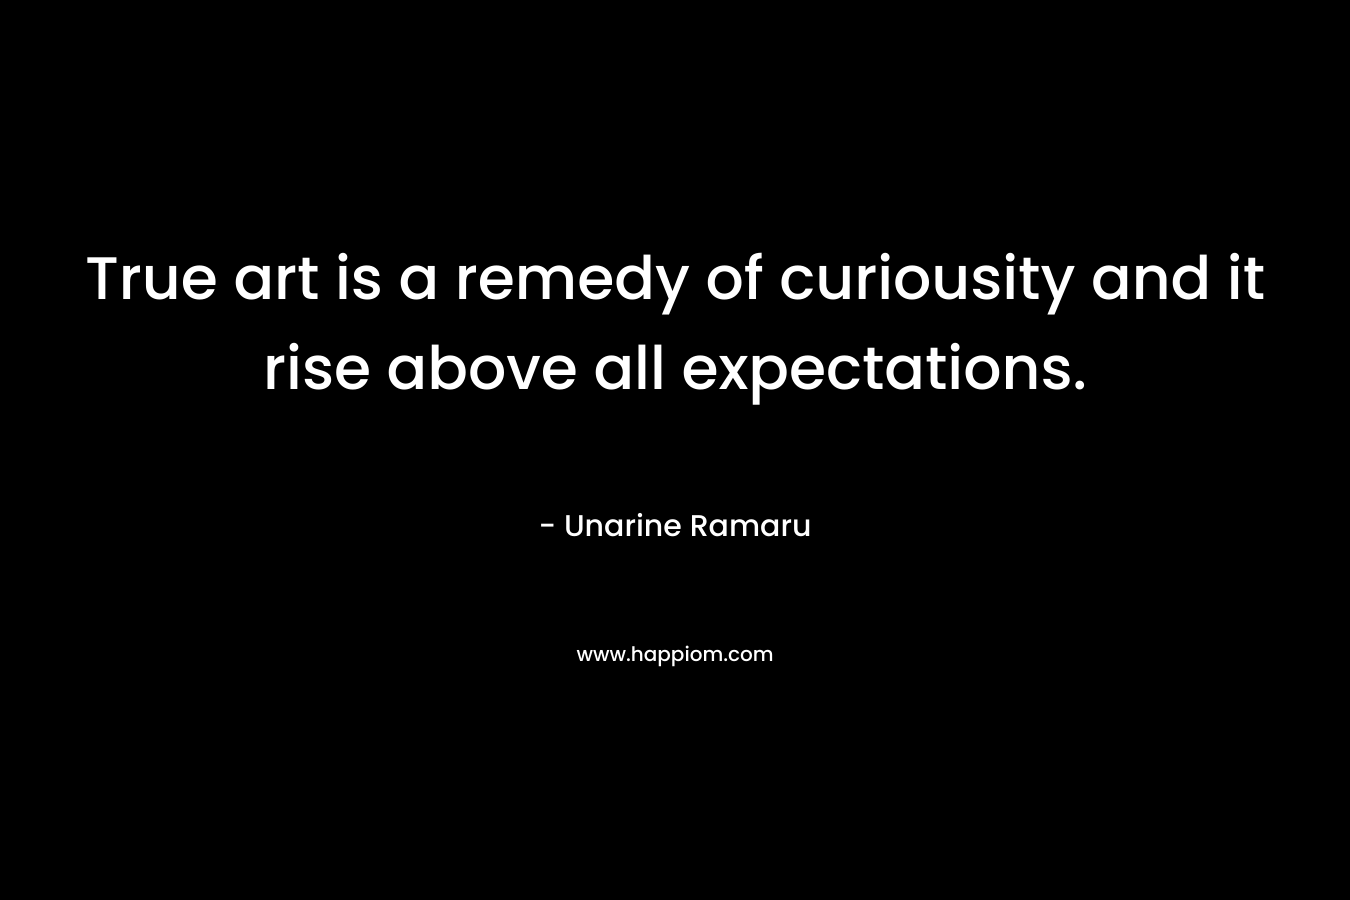 True art is a remedy of curiousity and it rise above all expectations.